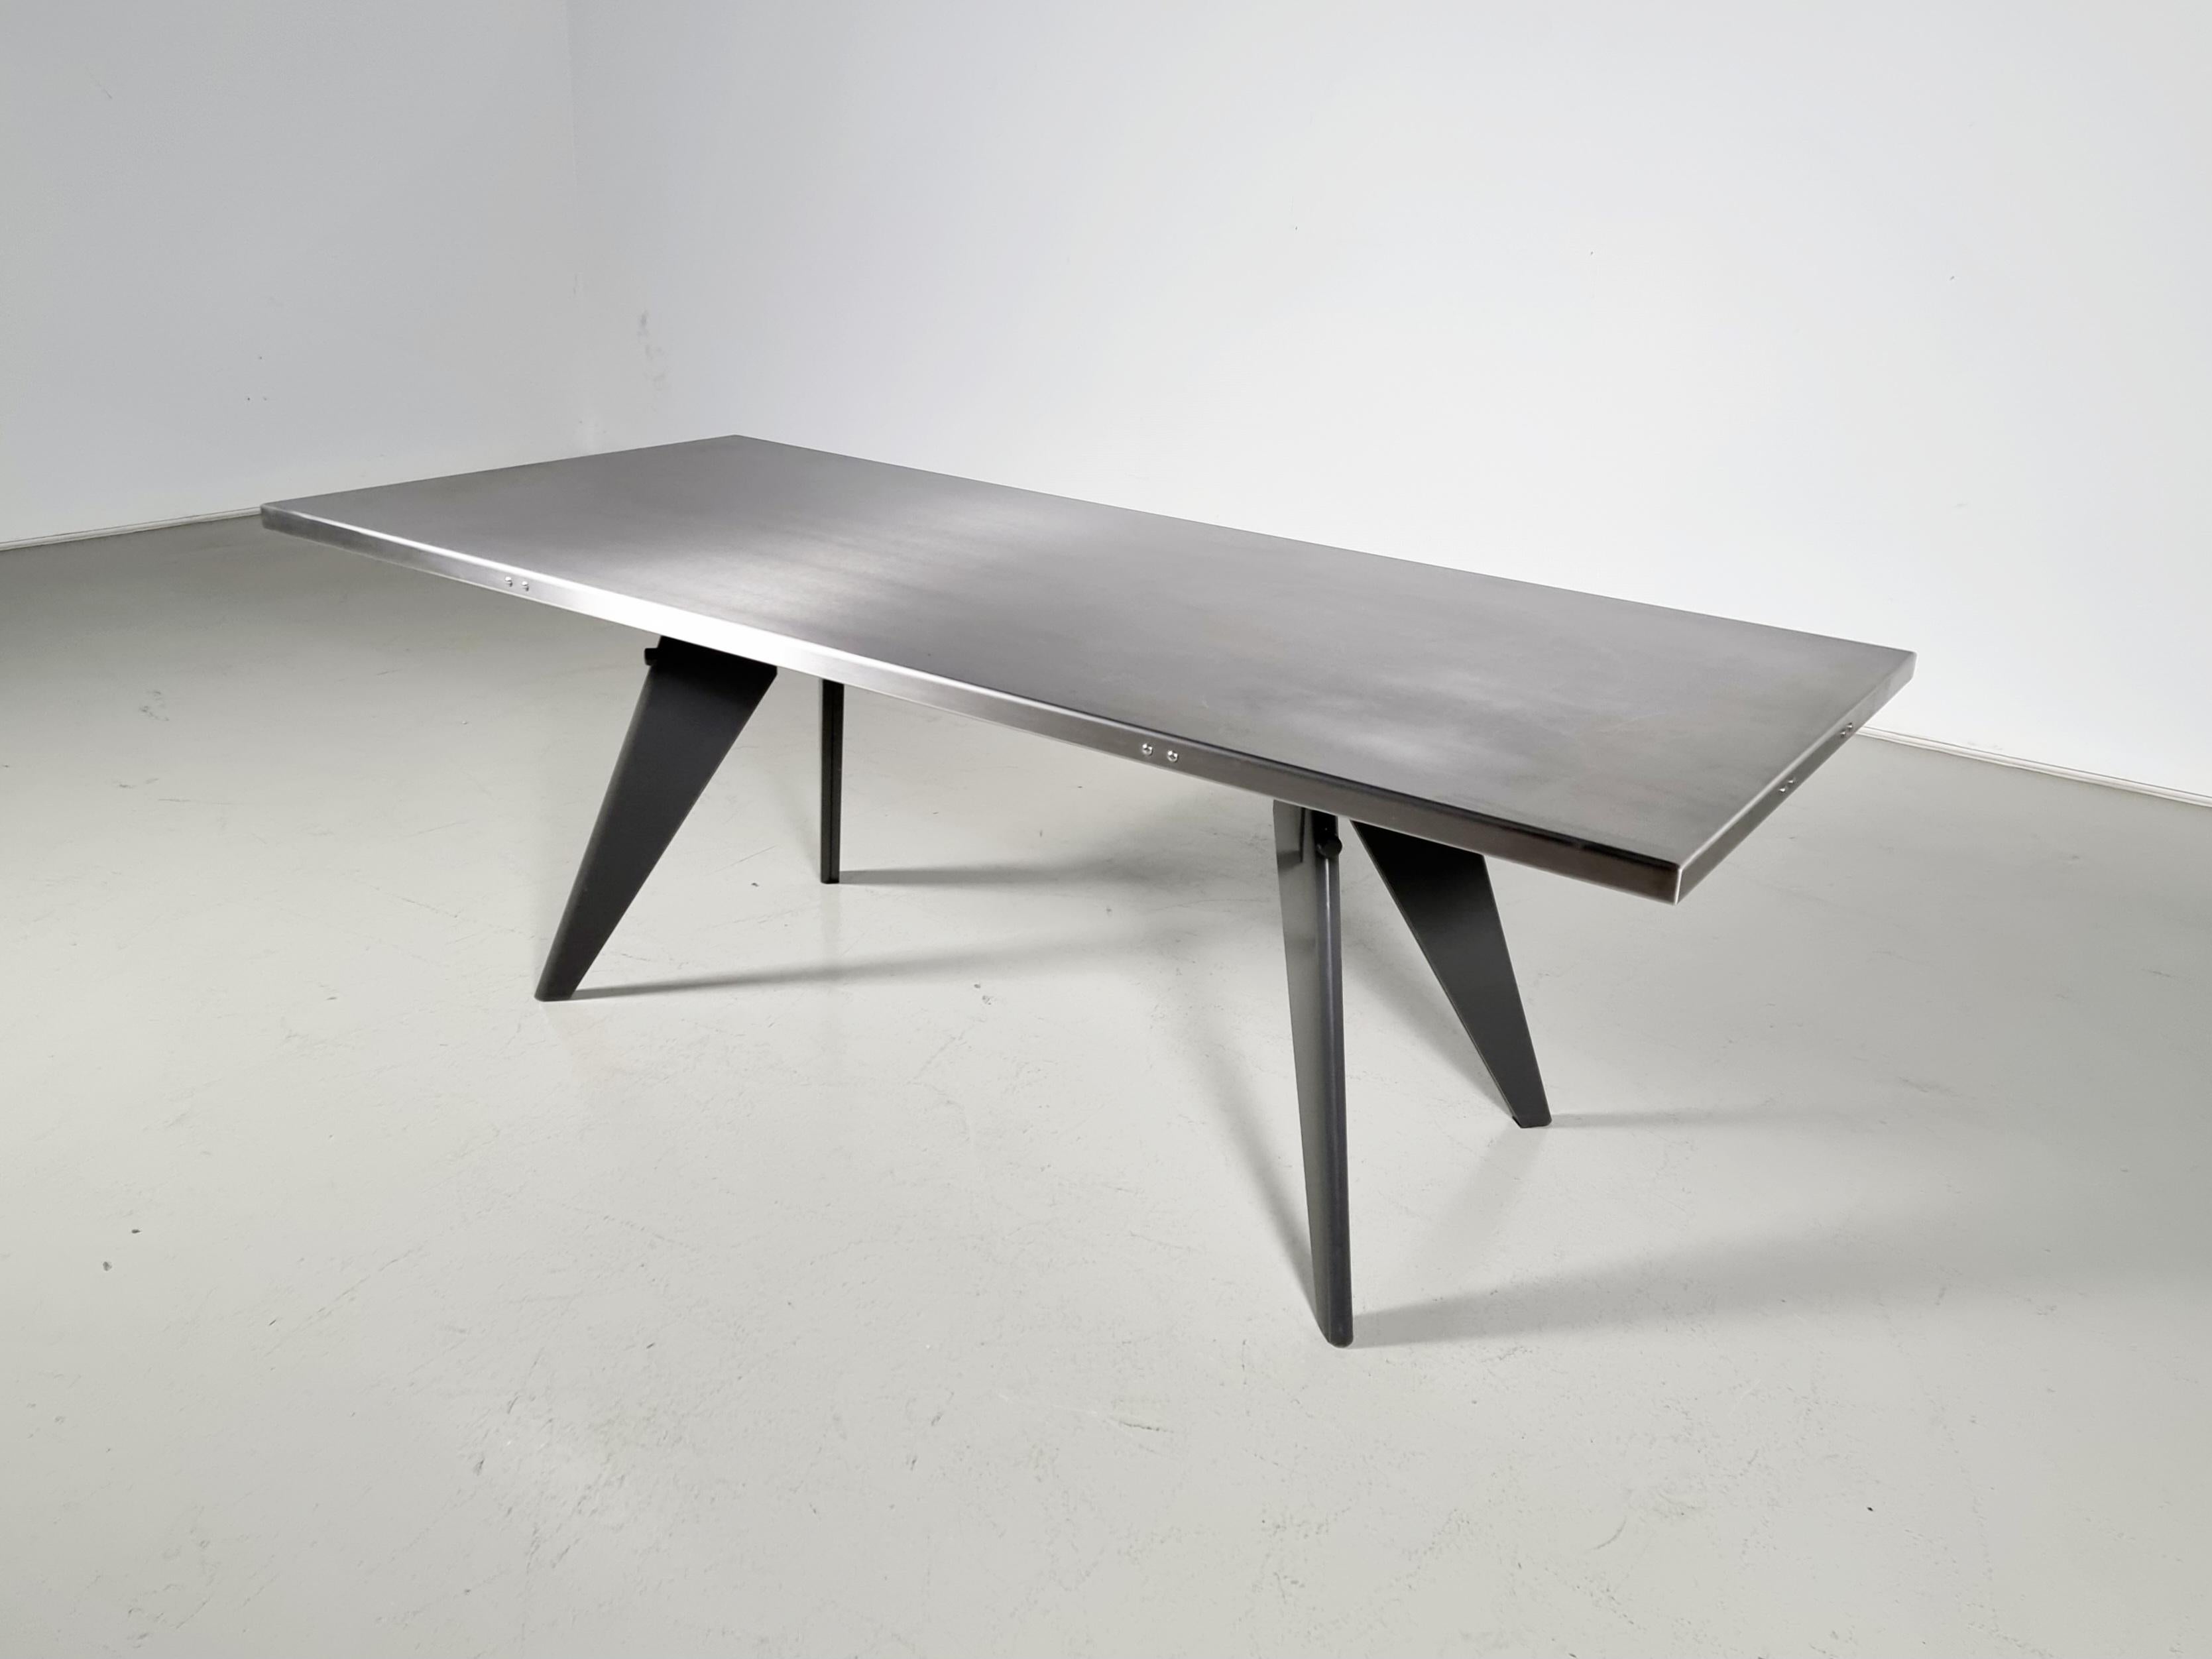 Jean Prouve by G-Star Raw for Vitra S.A.M. Tropique Table with matching chairs For Sale 3